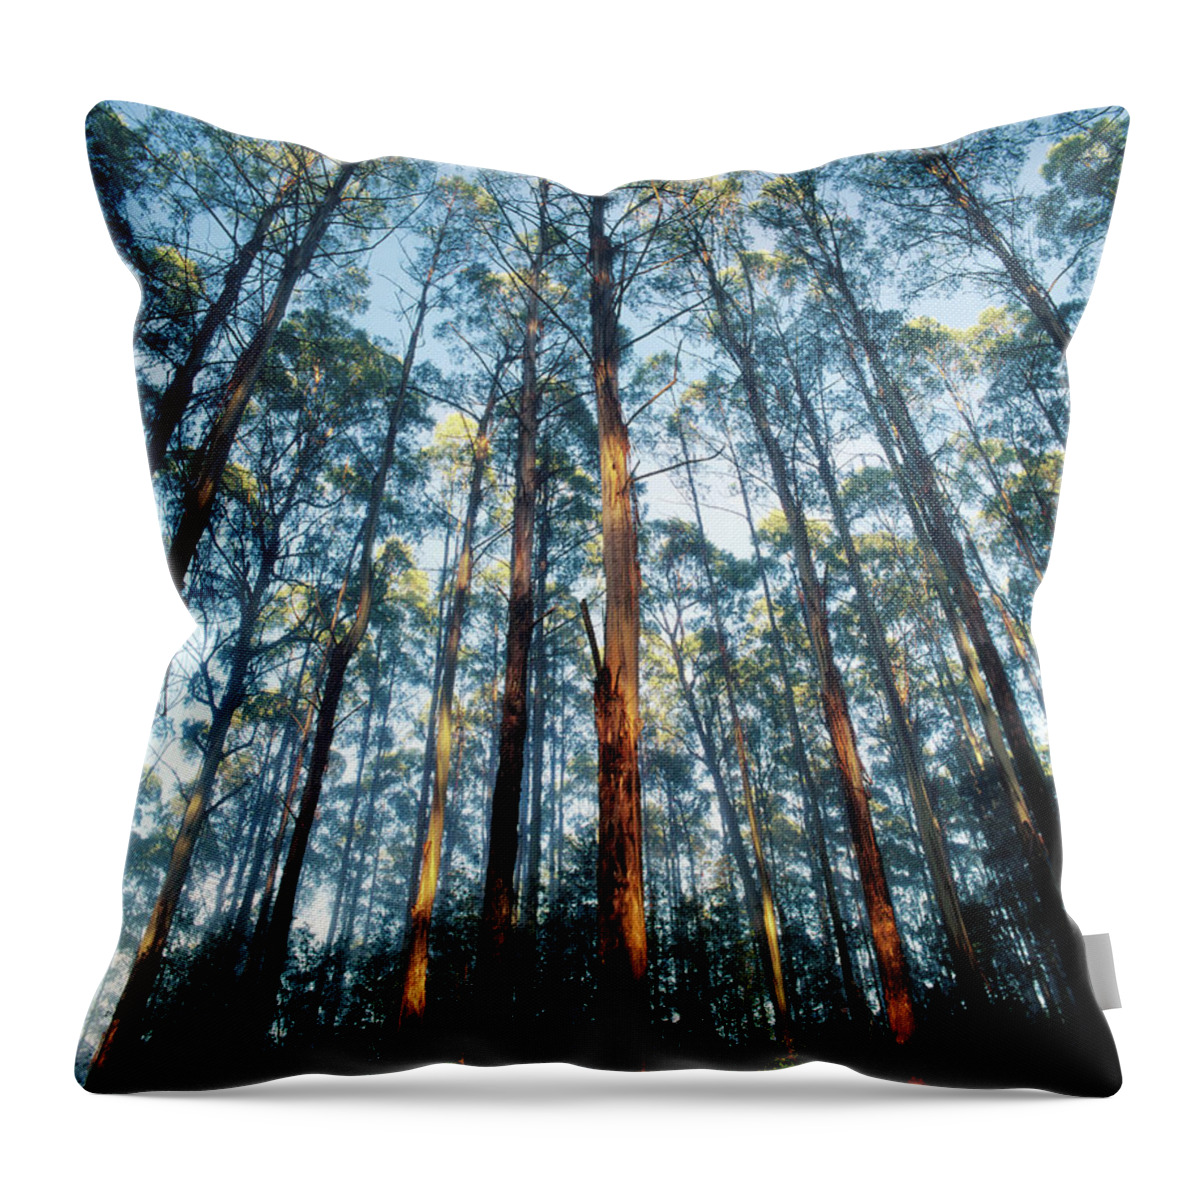 Shadow Throw Pillow featuring the photograph Mountain Ash Forest In Black Spur by Richard I'anson